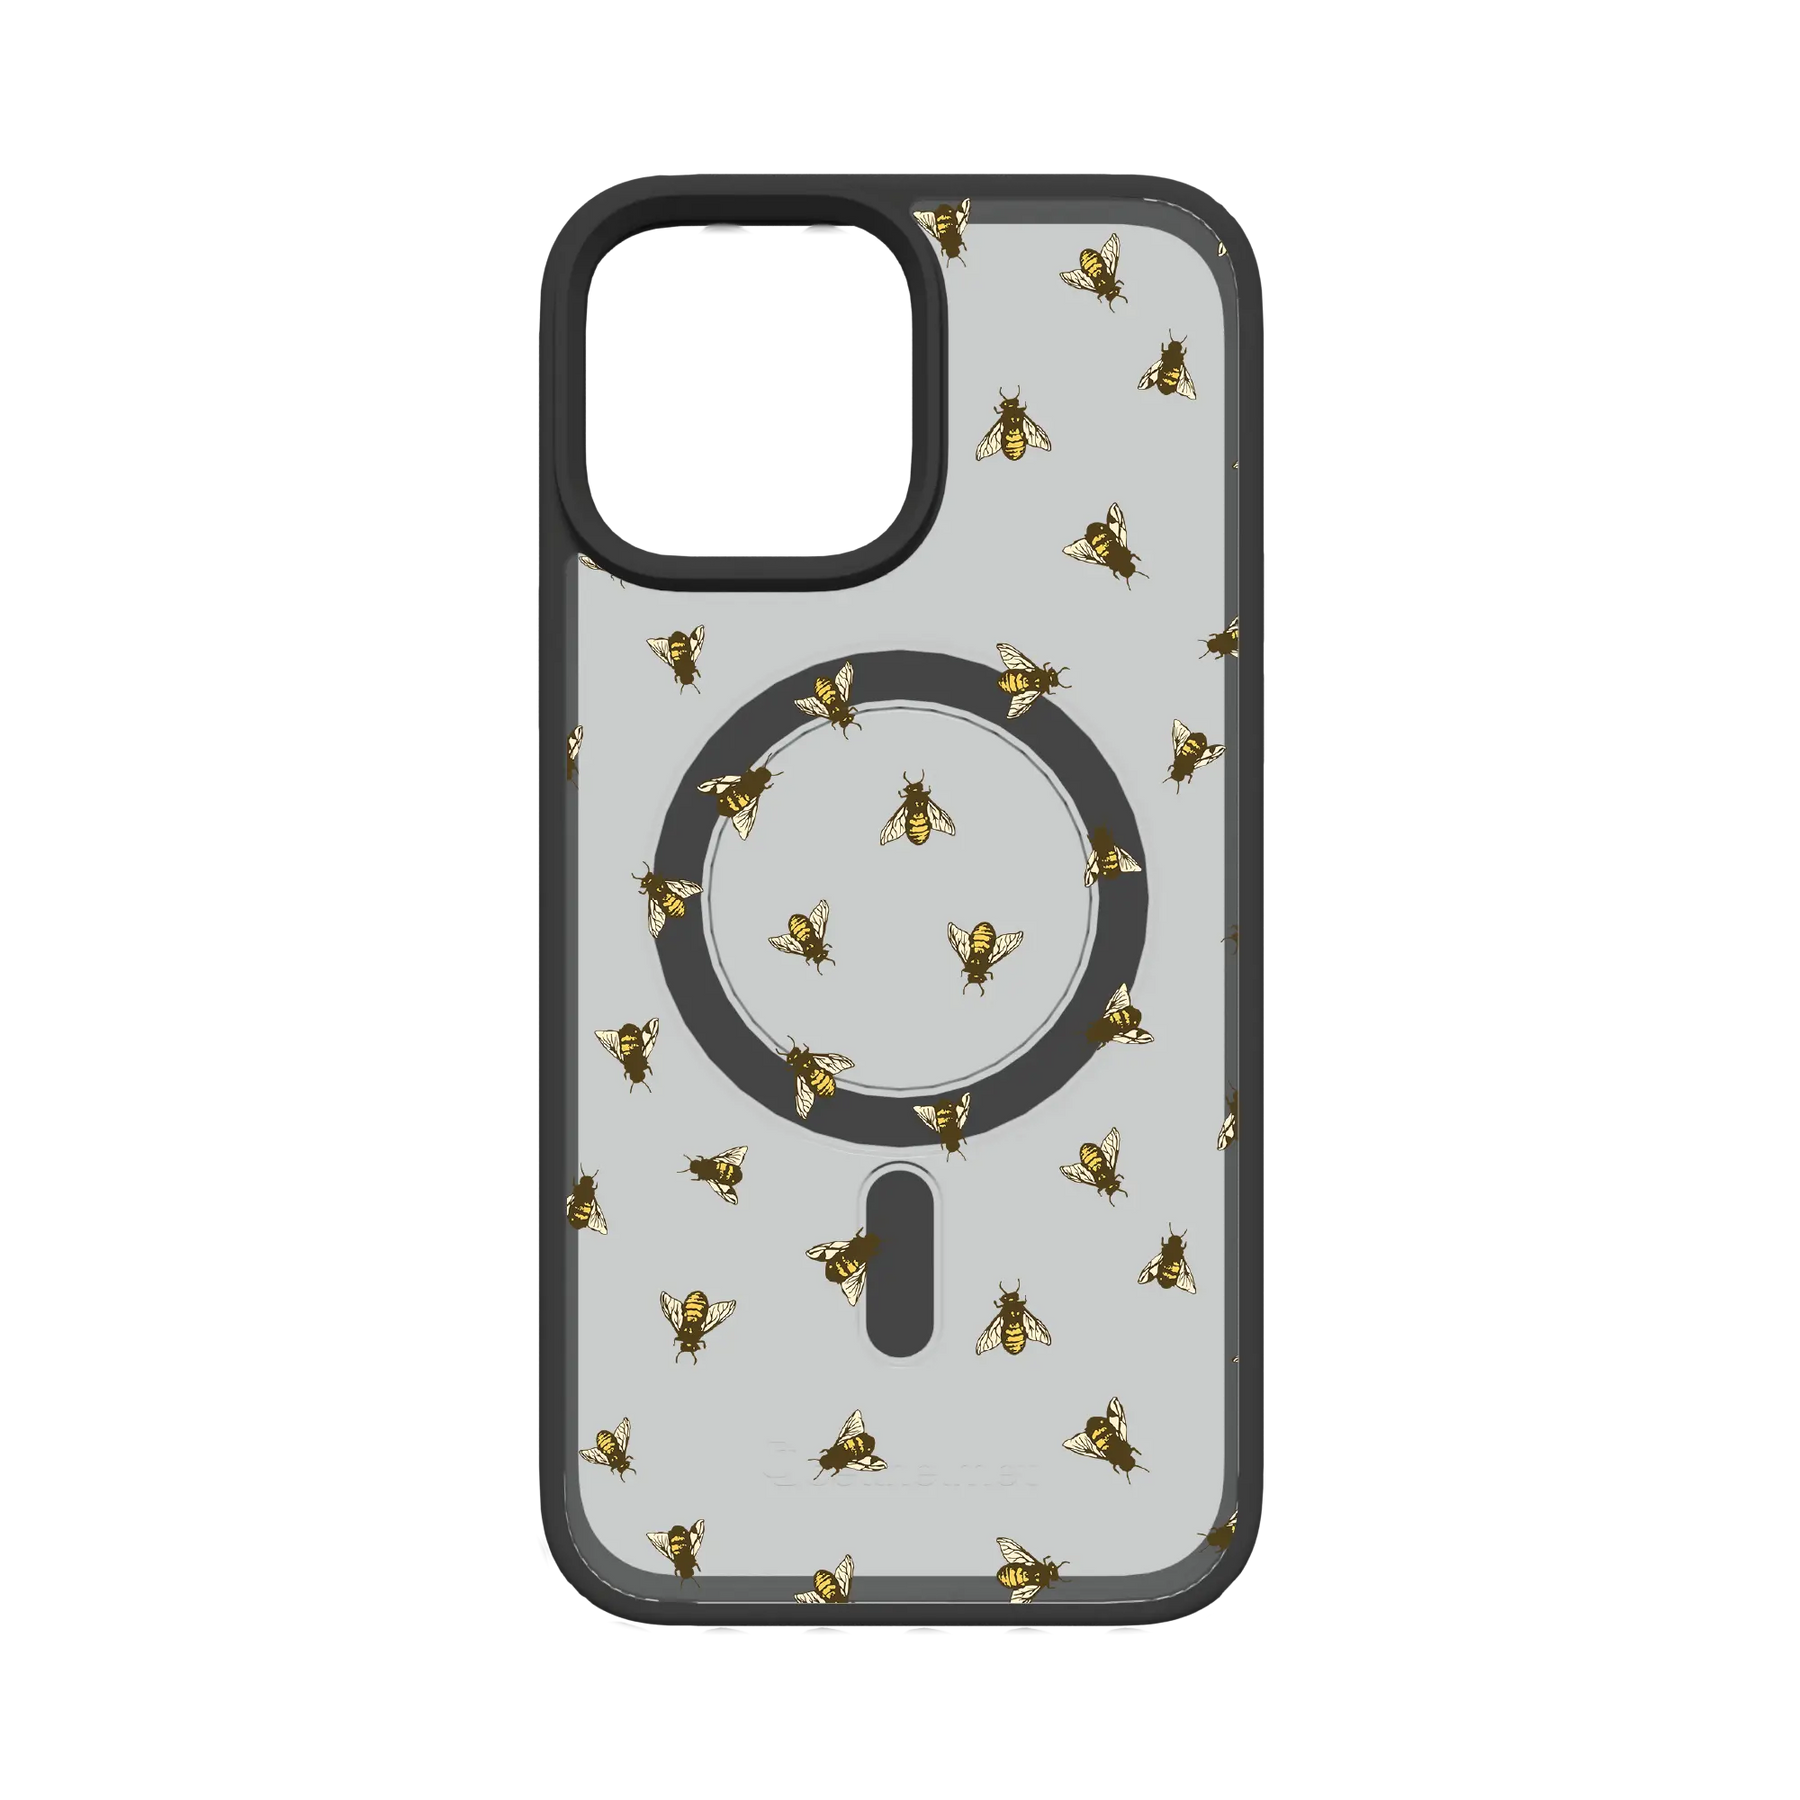 Apple-iPhone-12-Pro-Max-Crystal-Clear Sweet Like Honey | Protective MagSafe Bee Pattern Case | Birds and Bees Collection for Apple iPhone 12 Series cellhelmet cellhelmet